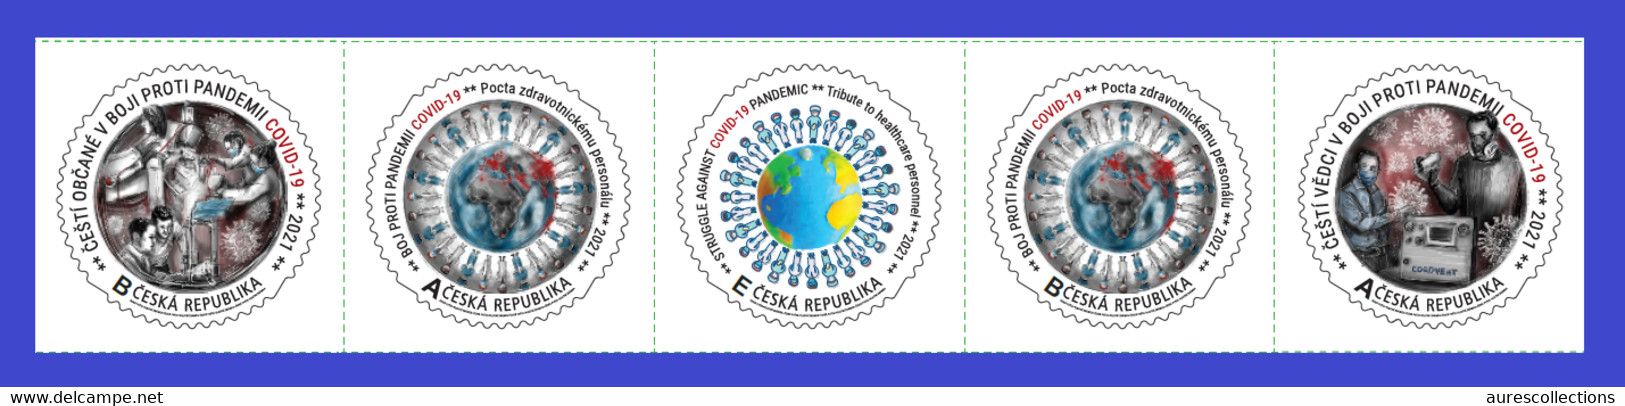 CZECH REPUBLIC TCHEQUE 2021 - STRIP 5v - OWN STAMPS - JOINT ISSUE - COVID-19 PANDEMIC PANDEMIE CORONA CORONAVIRUS - MNH - Emisiones Comunes